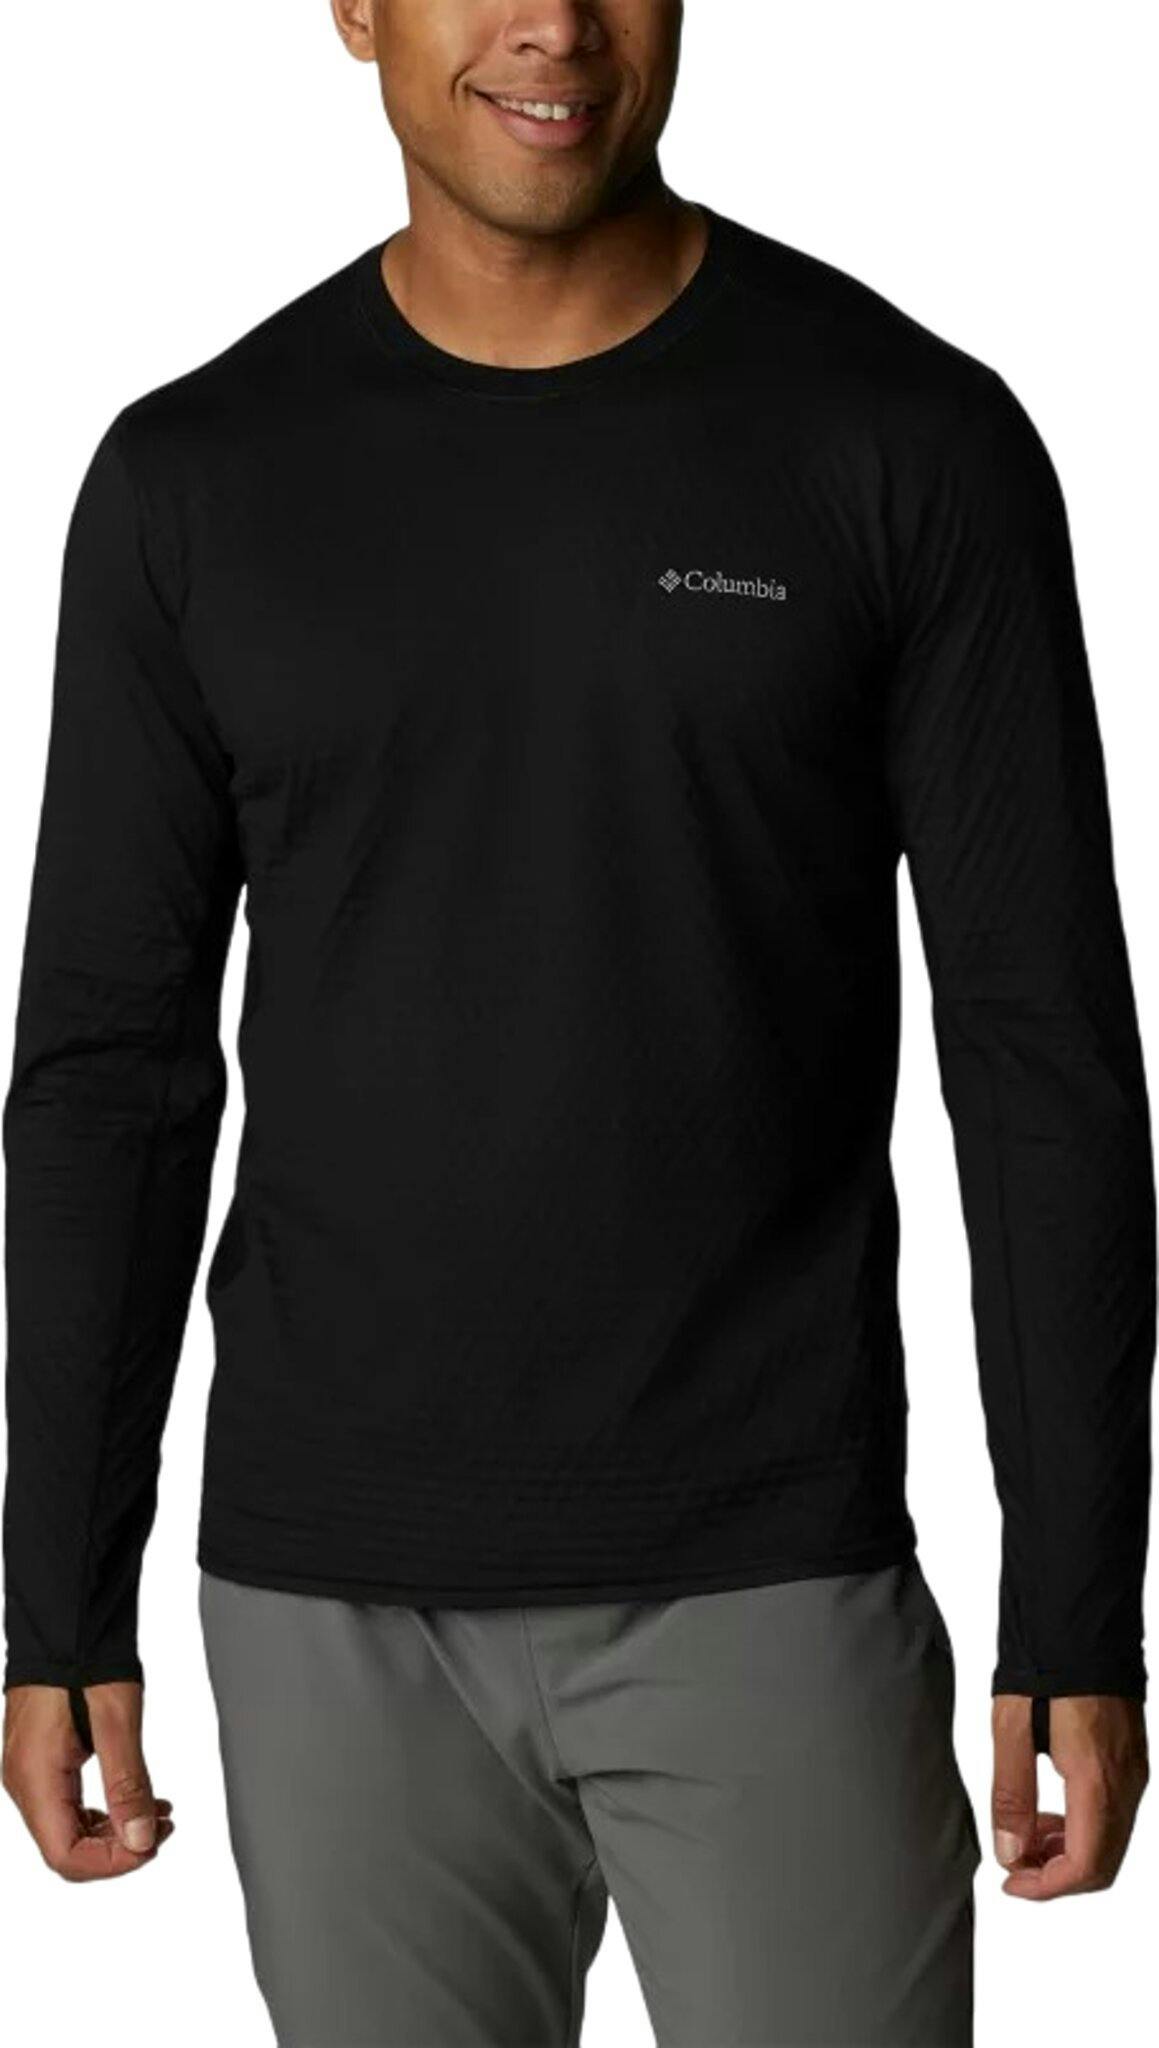 Product image for Bliss Ascent Long Sleeve T-Shirt - Men's